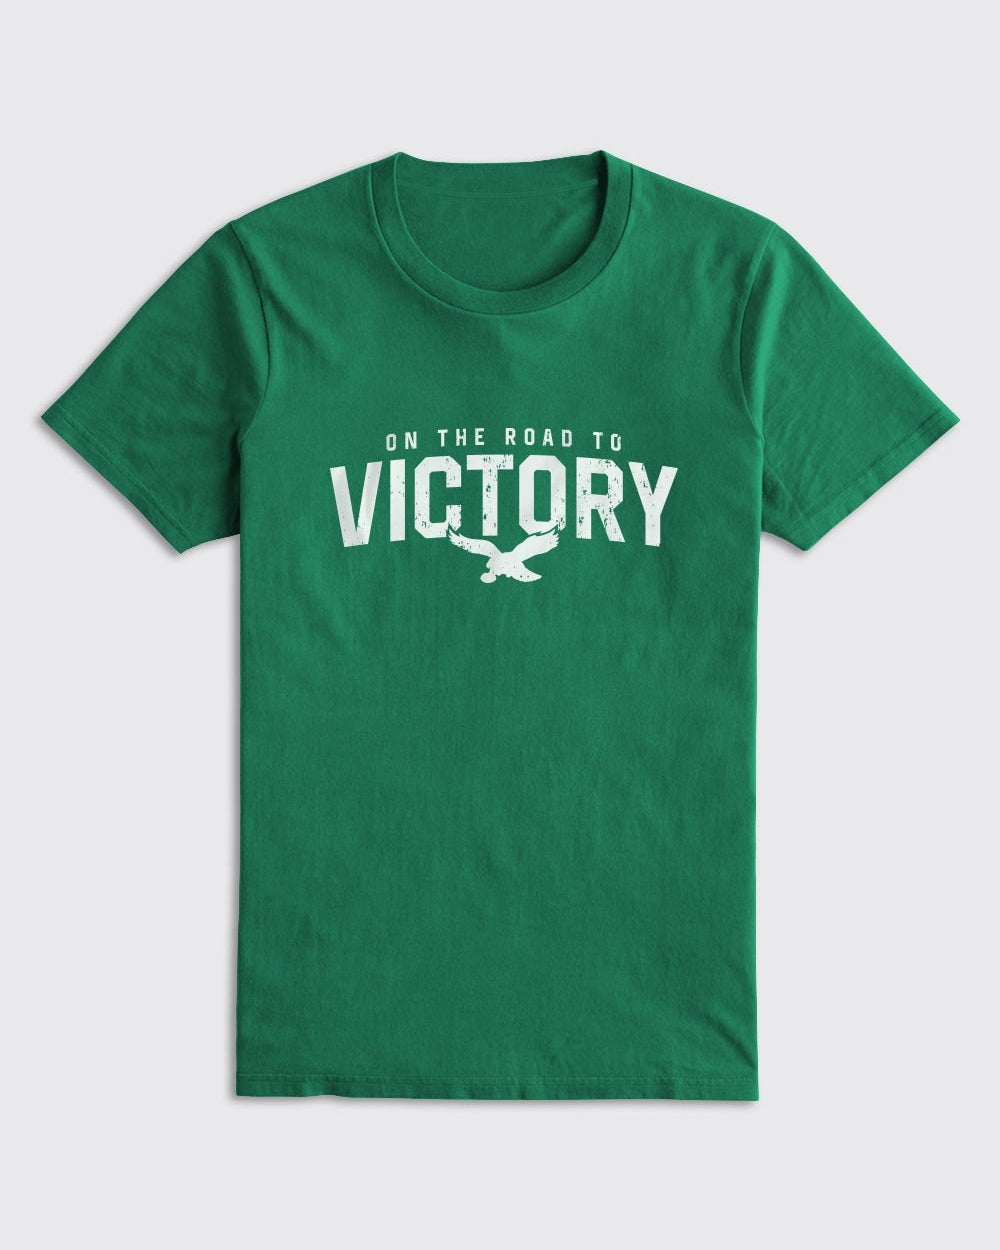 On The Road To Victory Shirt - Eagles, T-Shirts - Philly Sports Shirts